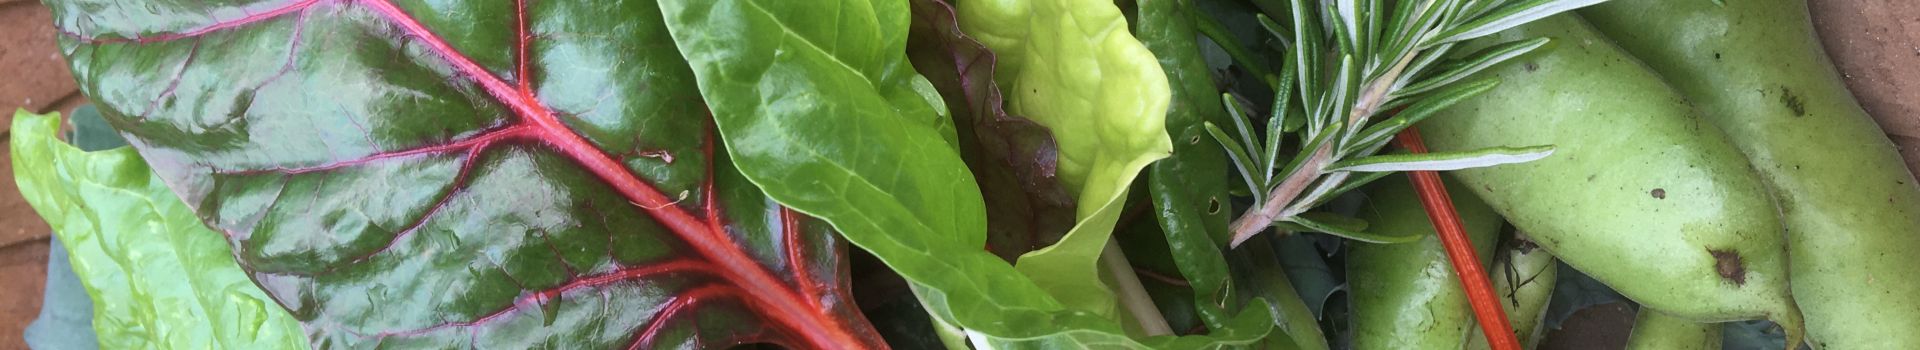 Chard, broad beans and rosemary